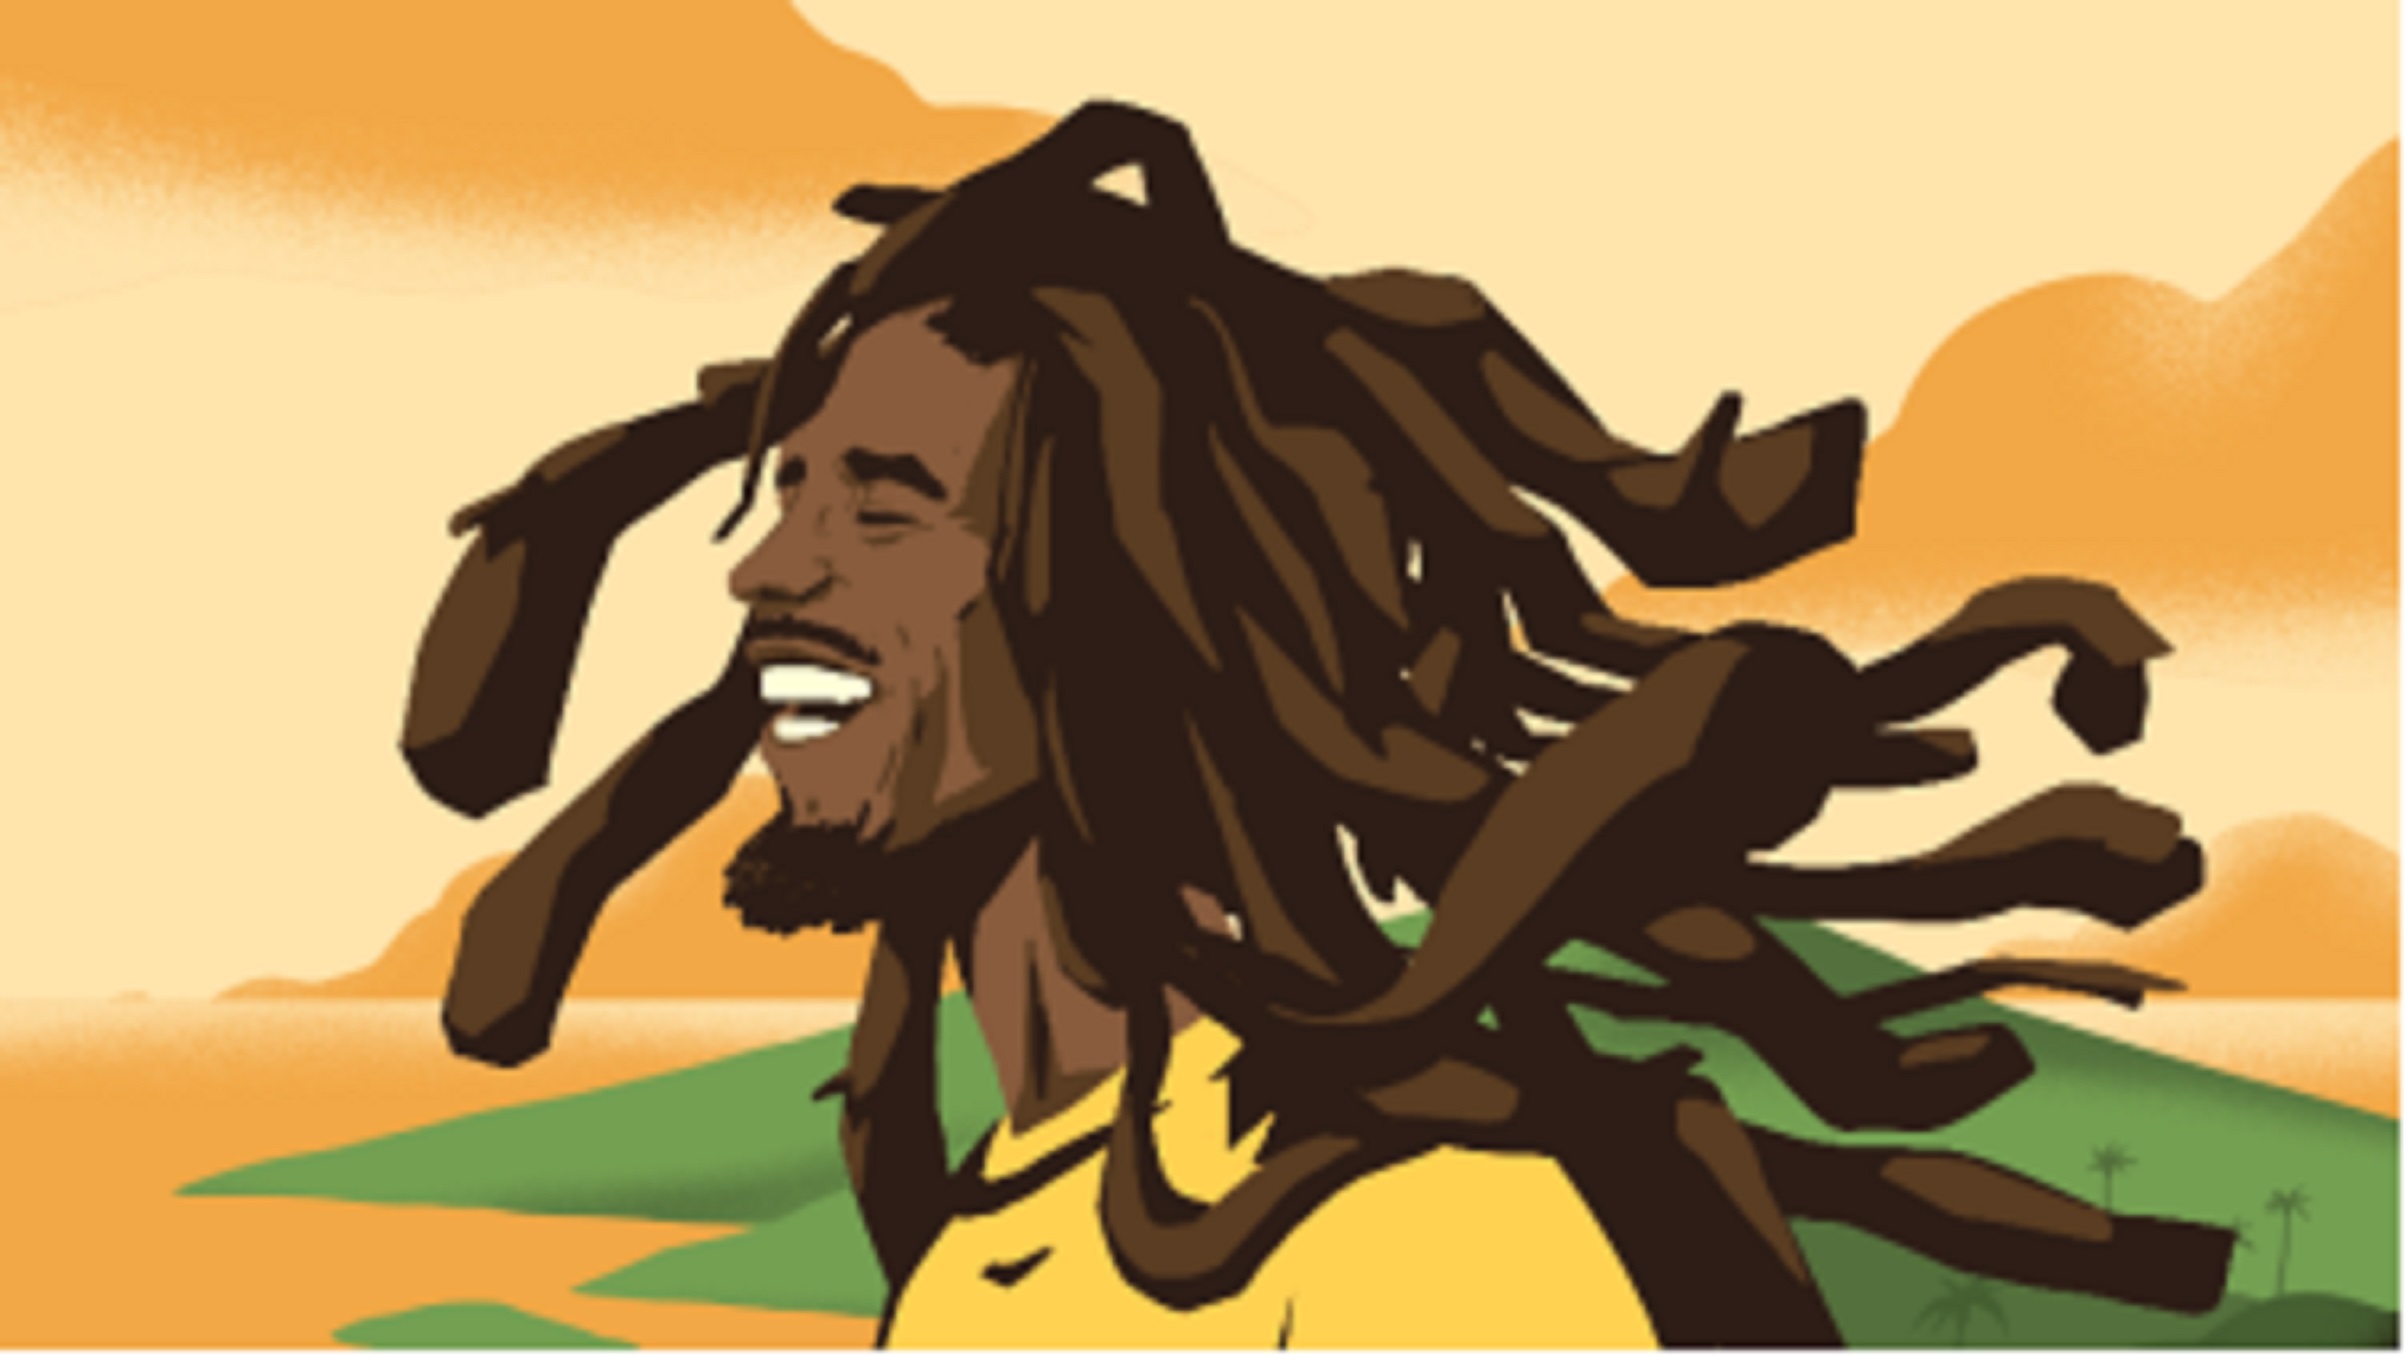 CELEBRATE THE SUMMER OF MARLEY WITH A BRAND NEW ANIMATED MUSIC VIDEO FOR BOB MARLEY & THE WAILERS “COULD YOU BE LOVED”